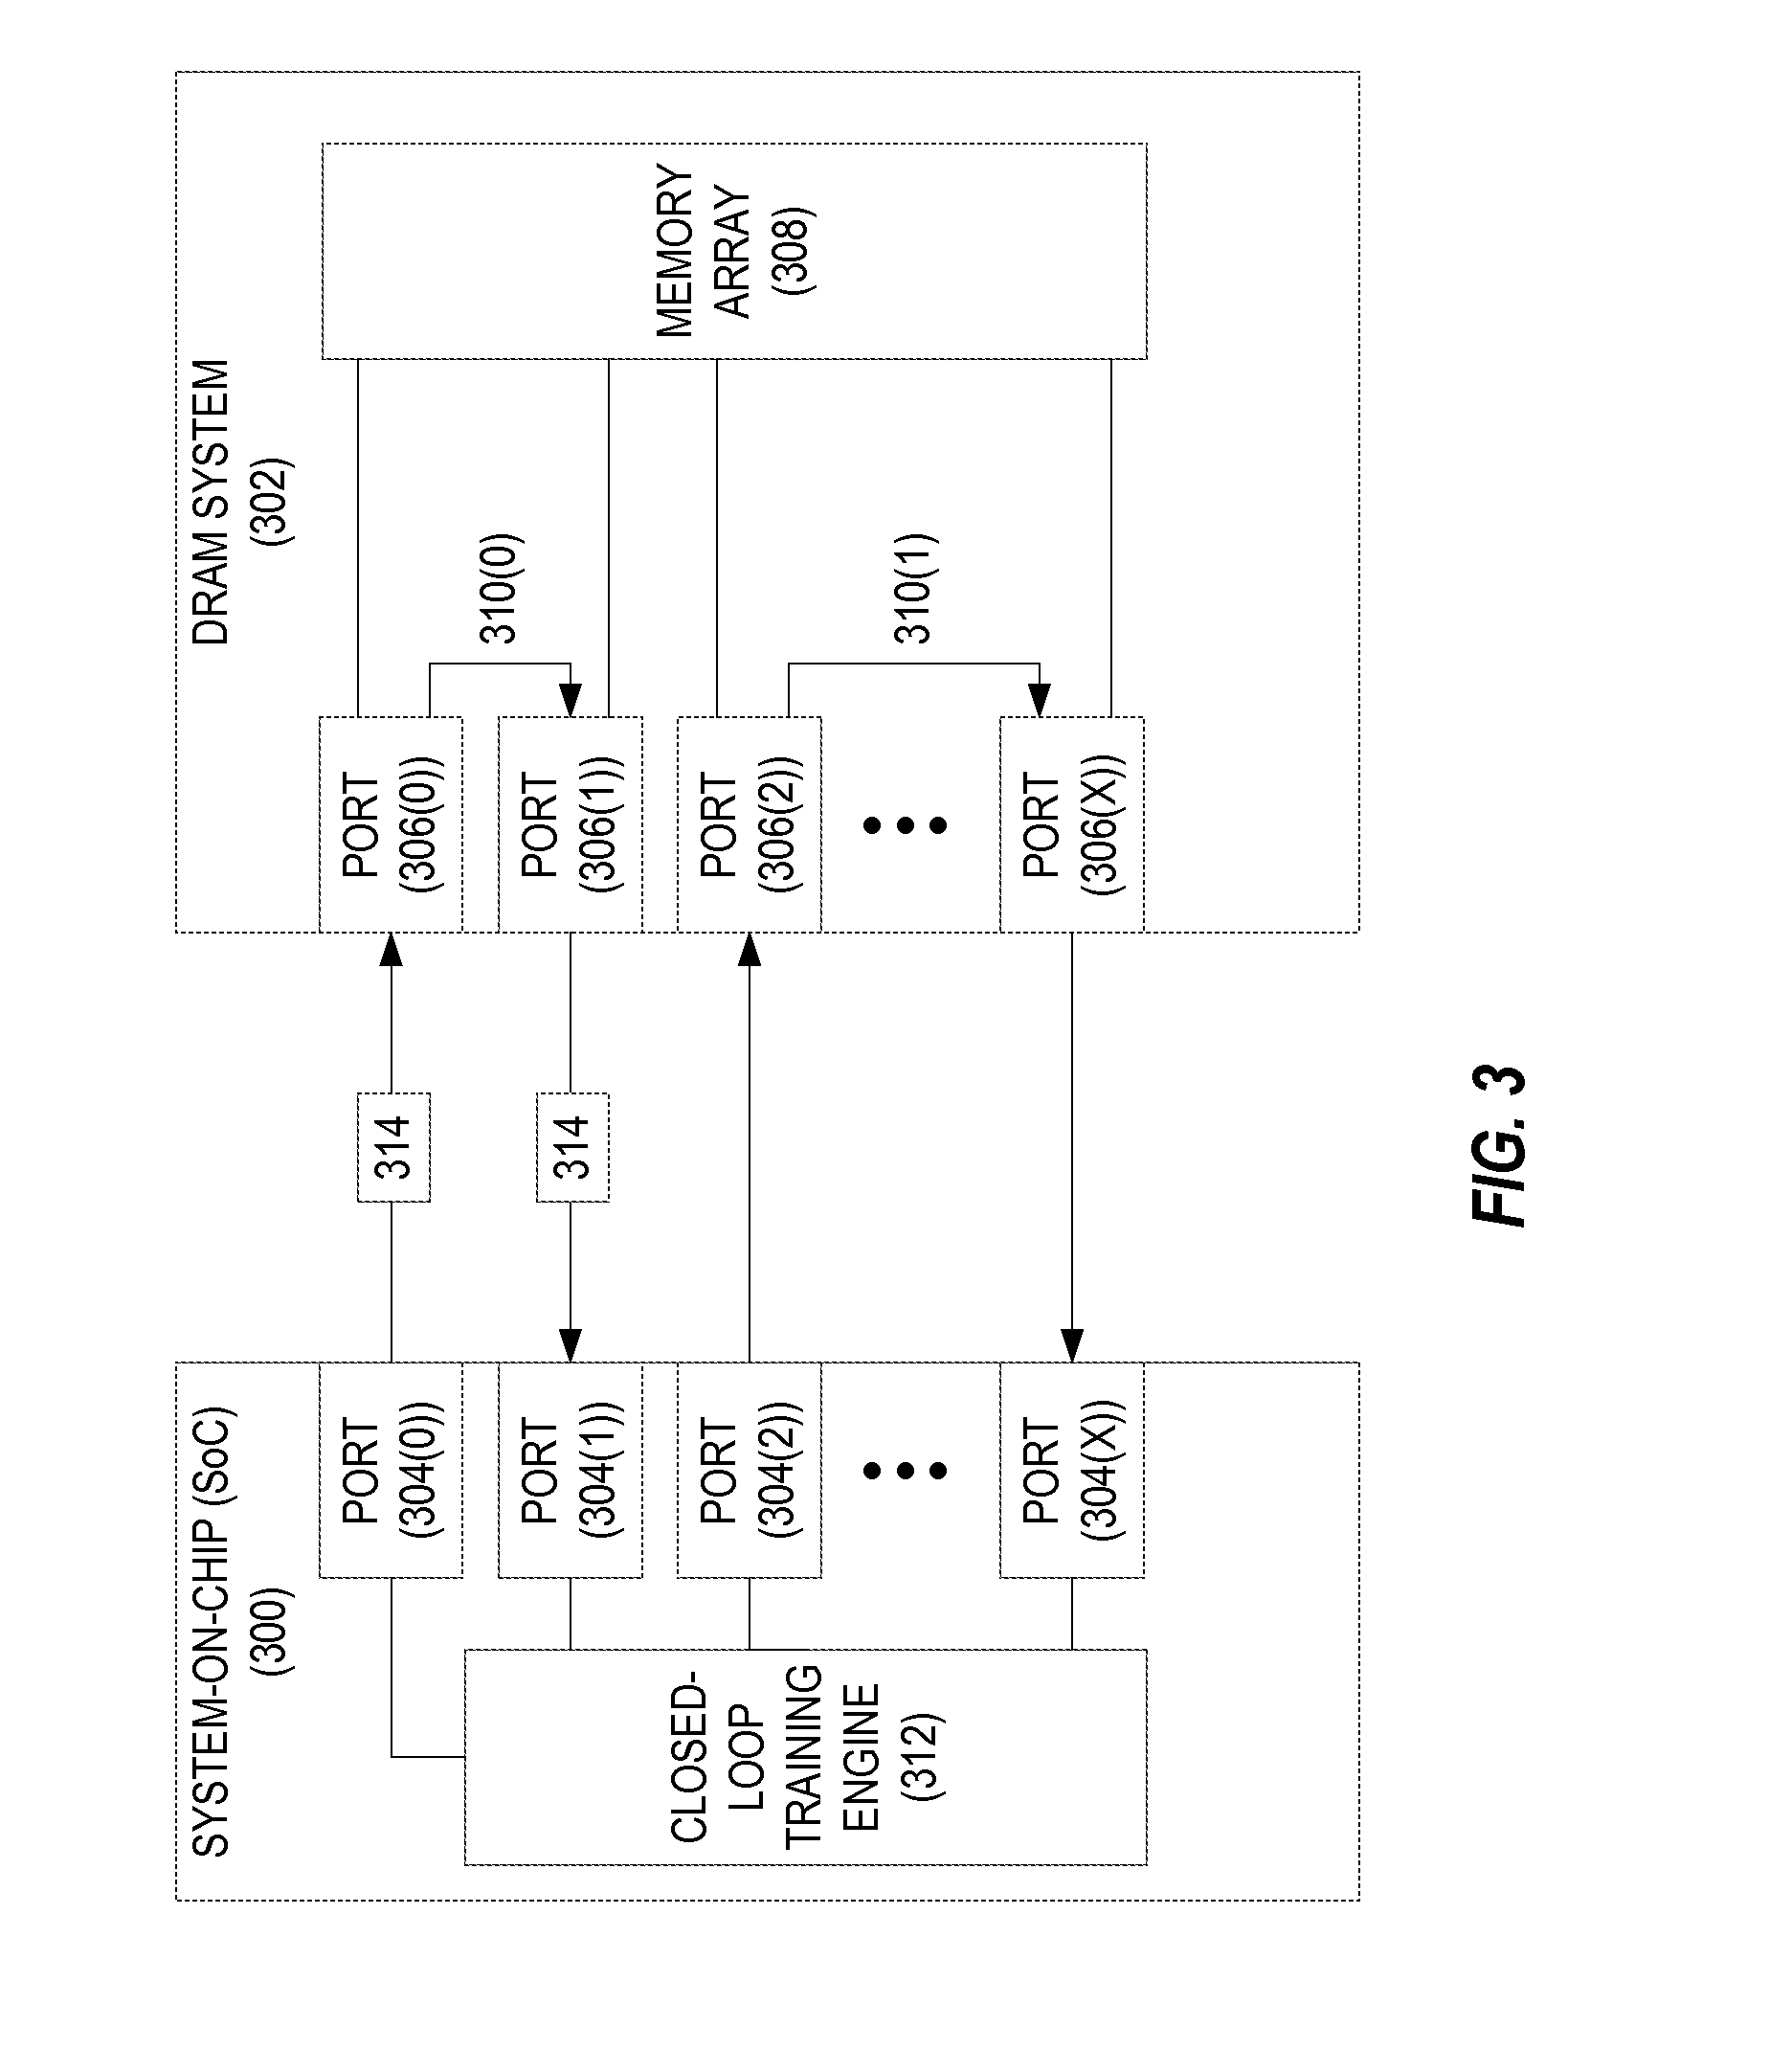 Providing memory training of dynamic random access memory (DRAM) systems using port-to-port loopbacks, and related methods, systems, and apparatuses